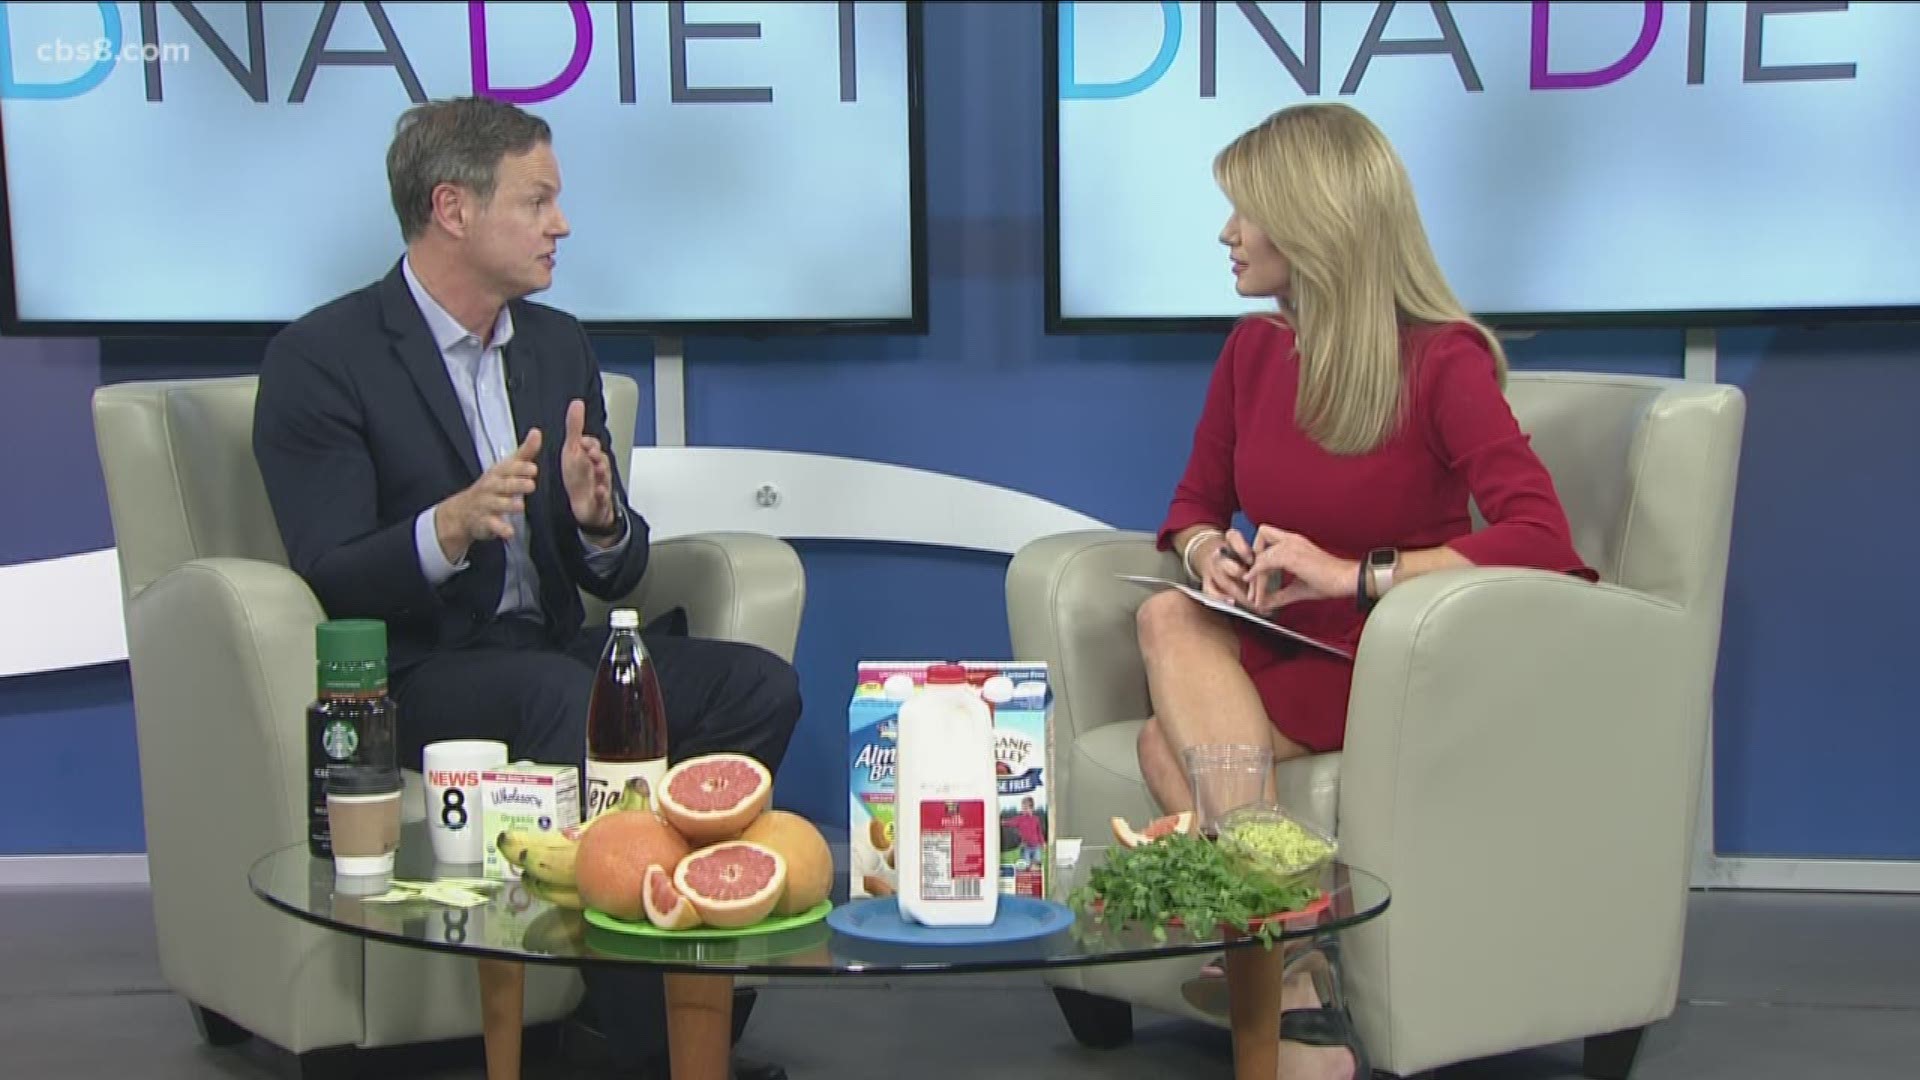 Founder of DNA Diet Plan Scott Penn visited Morning Extra to discuss more about the system and how it can help those who want to lose weight.